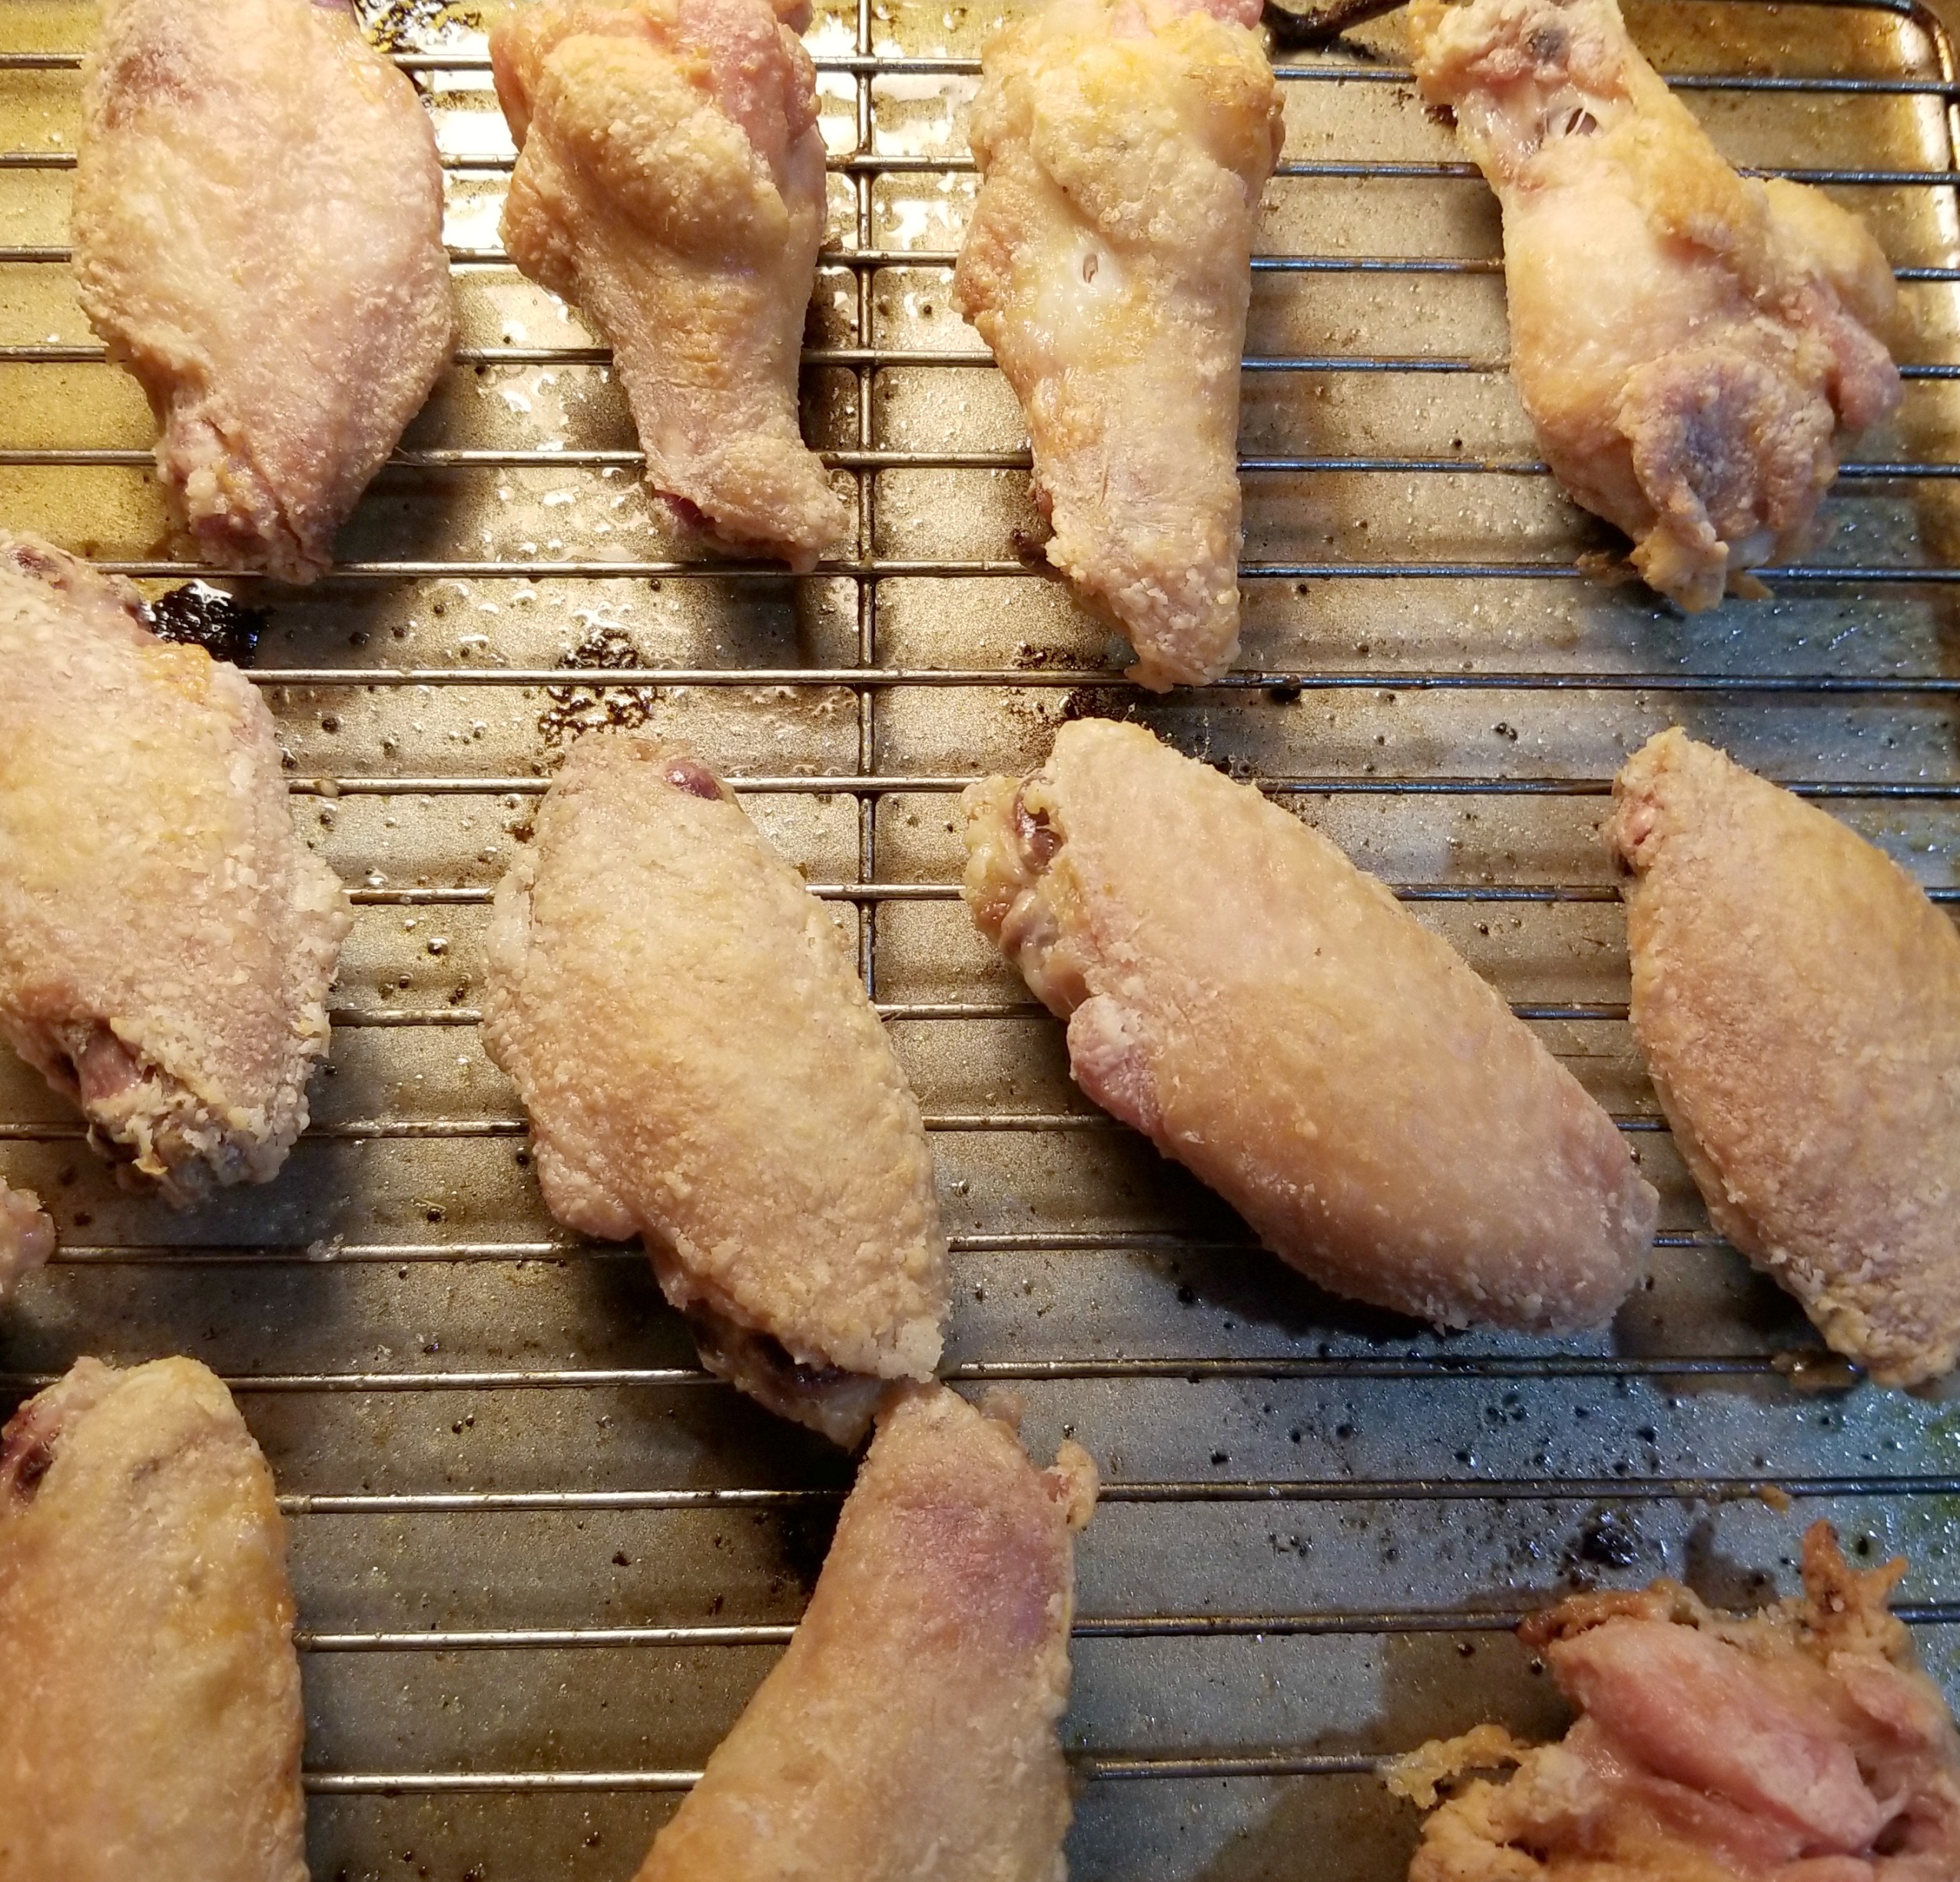 Keto Low Carb Crispy Oven Baked Chicken Wings